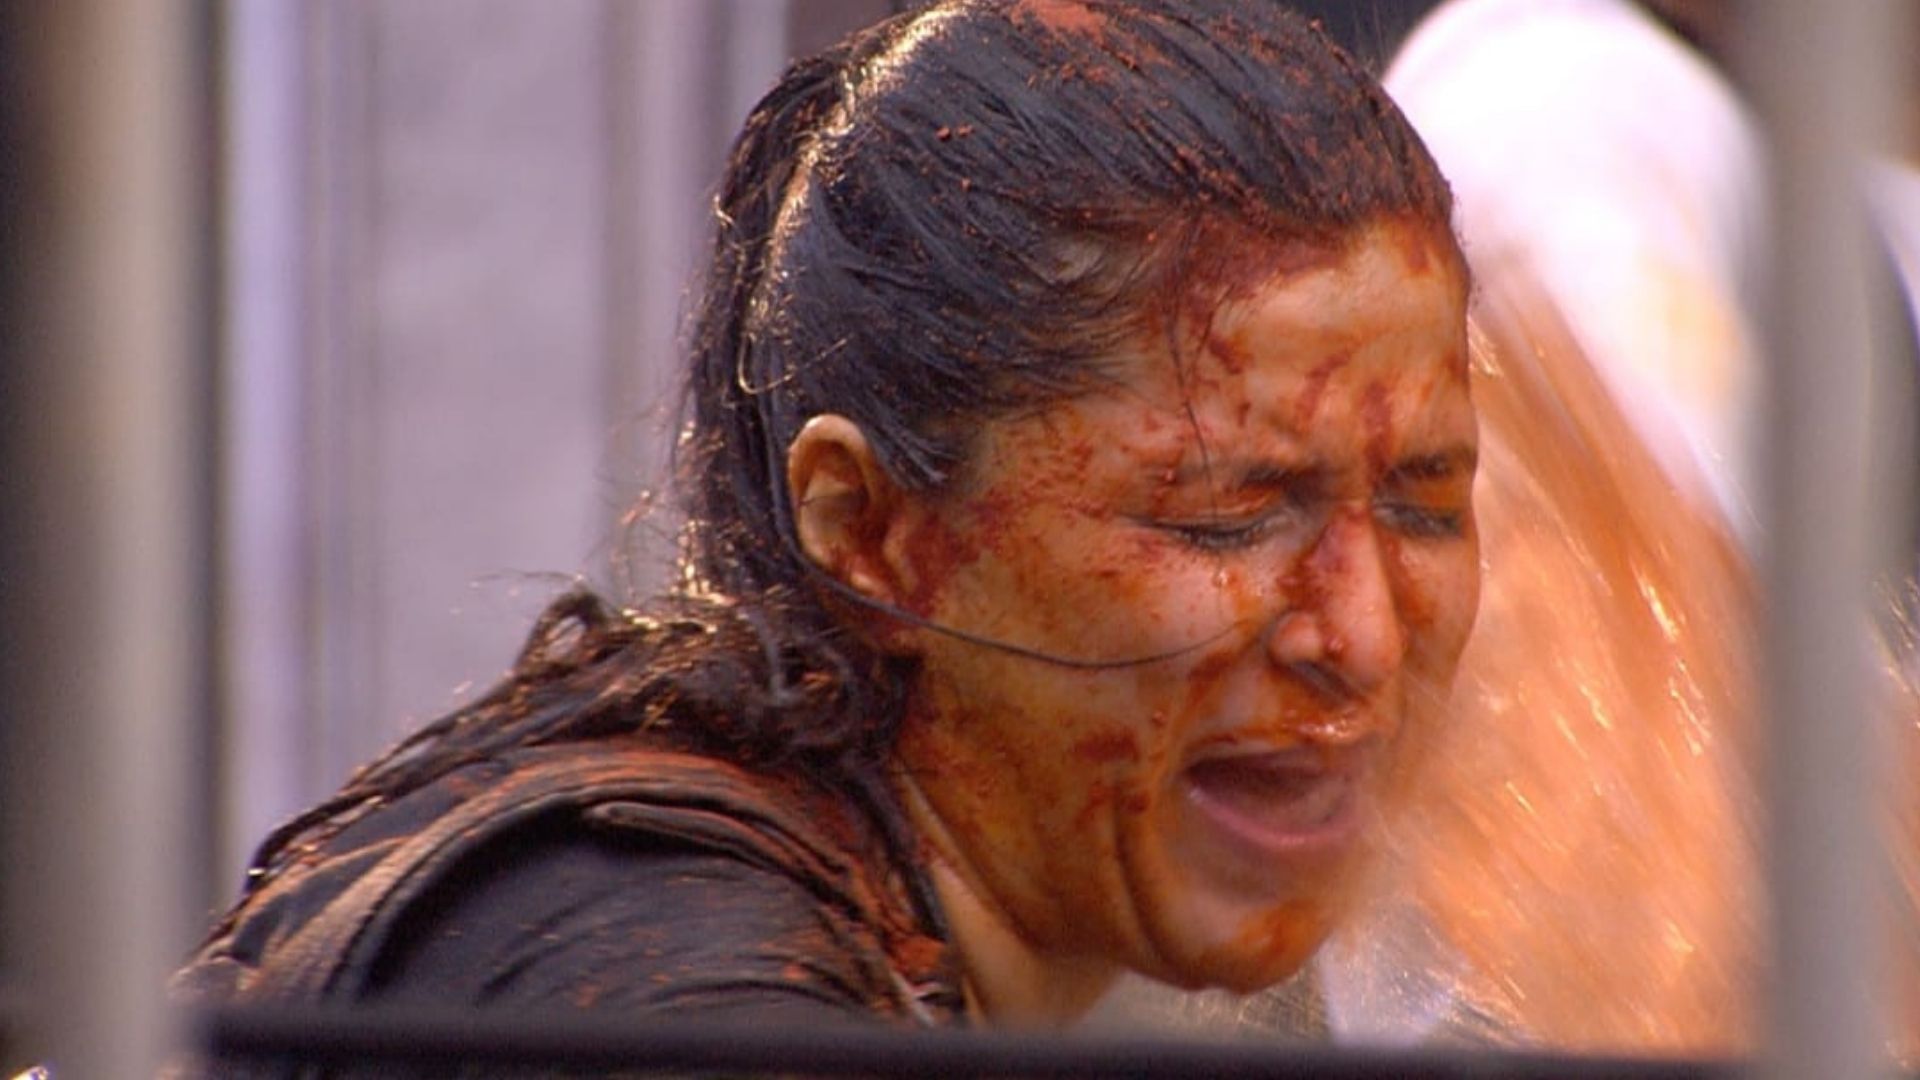 Fiery Showdowns and Vows: Ankita Lokhande and Vicky Jain's Explosive Clash on'BIGG BOSS